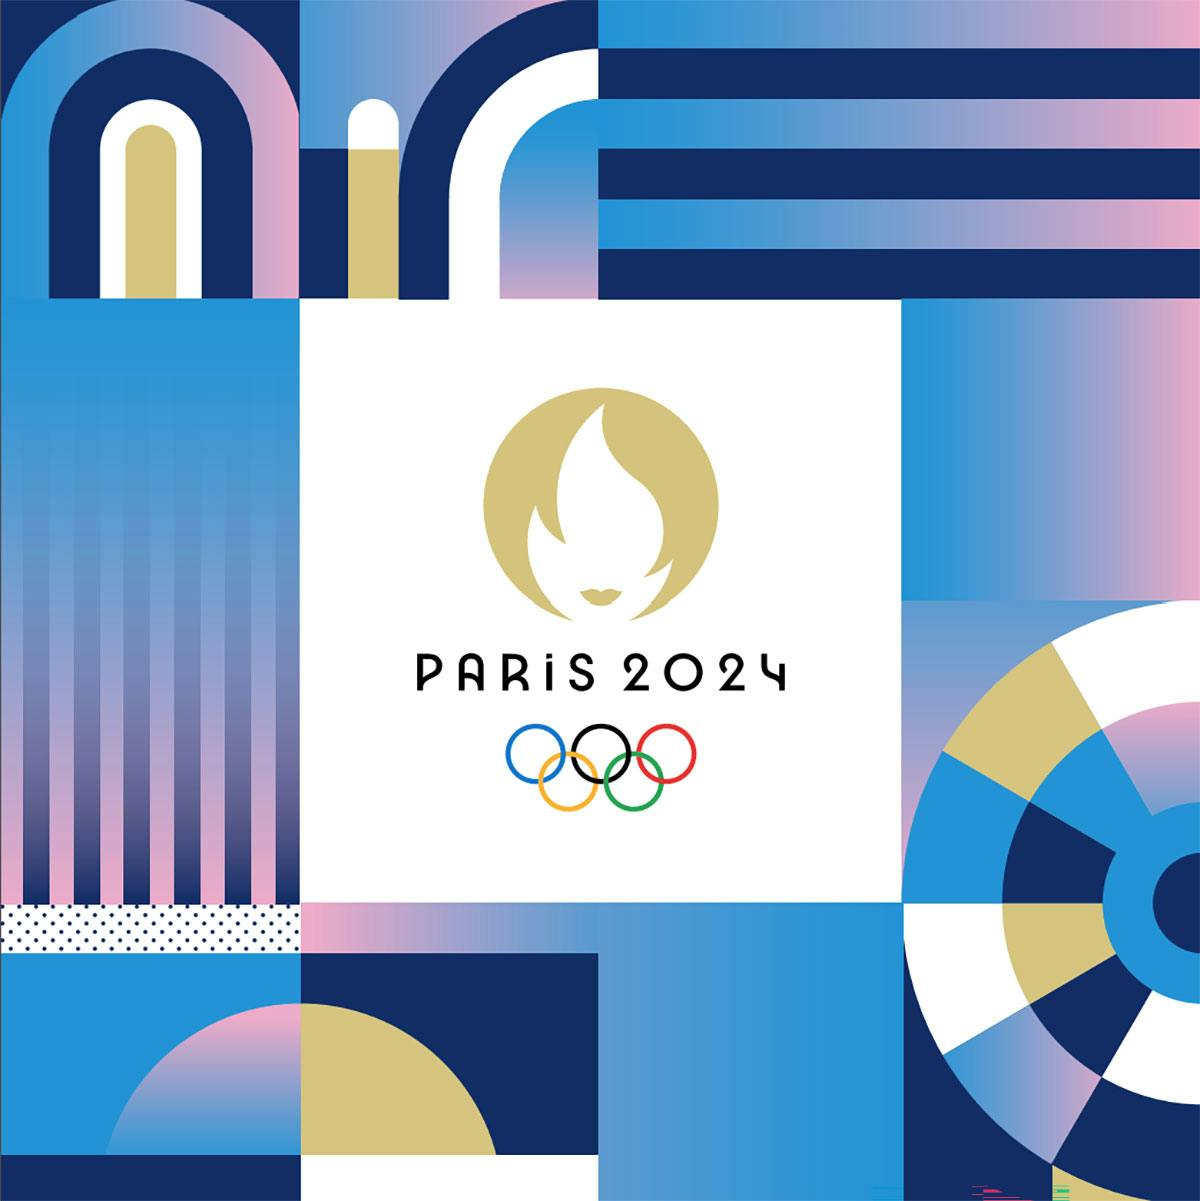 Campaign launched to include women's decathlon at Paris 2024